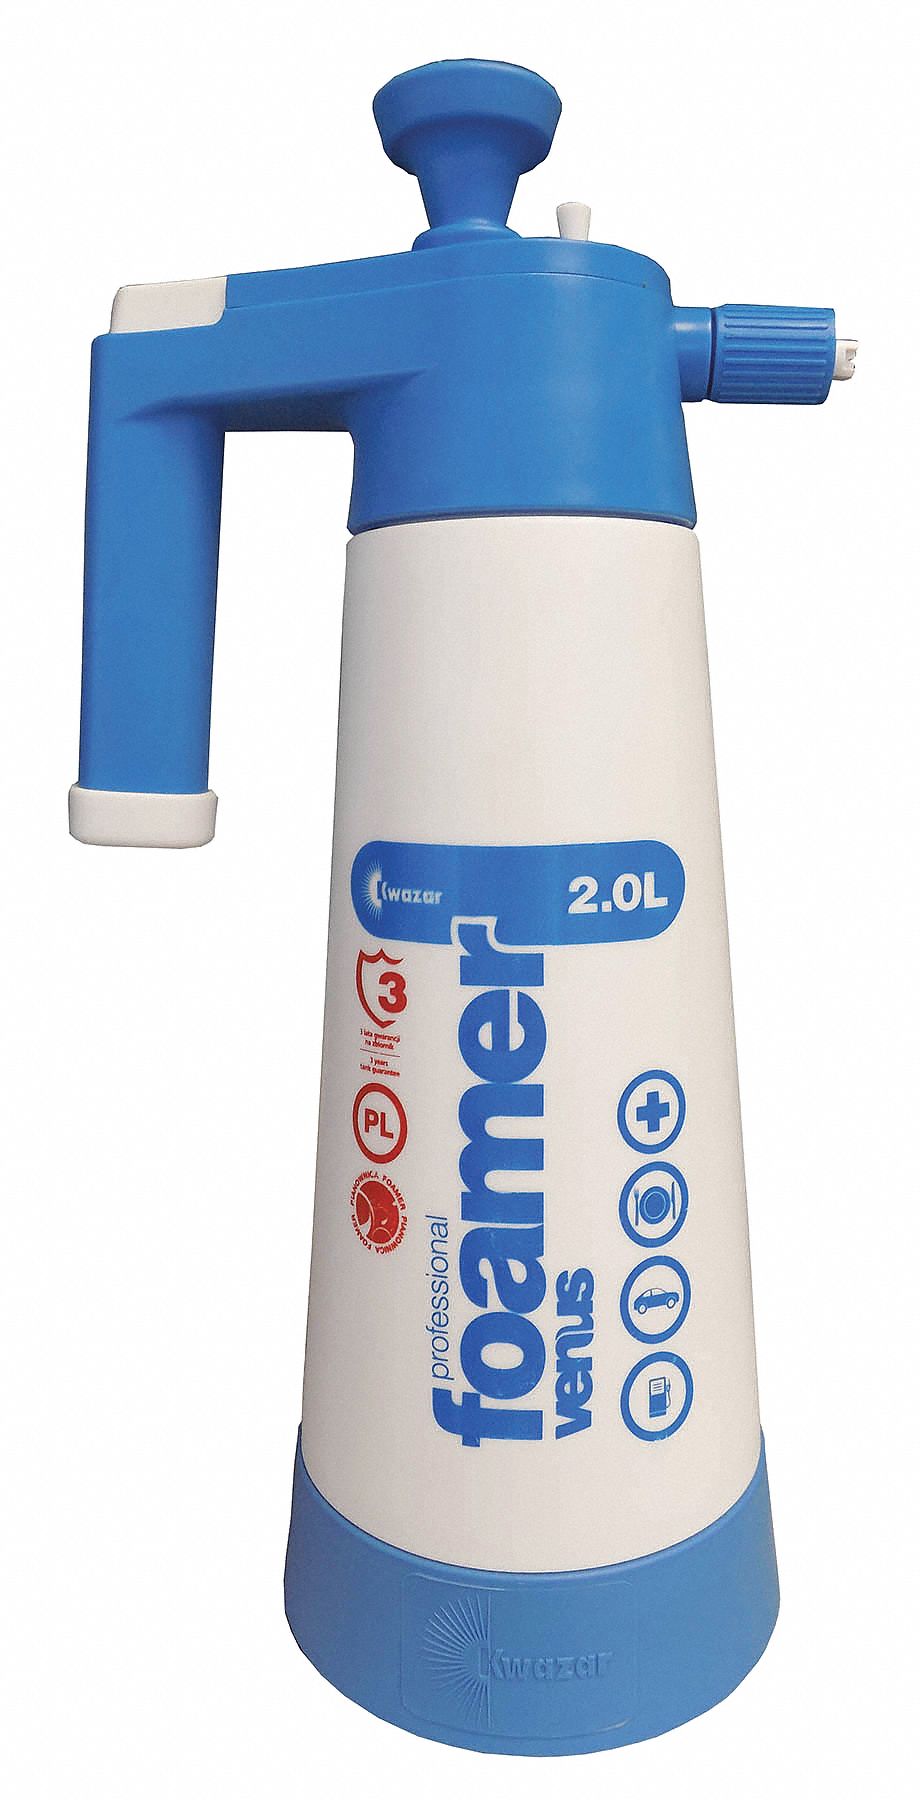 Compressed Air Spray Bottle: 1.5 L Container Capacity, Mist, White, Blue